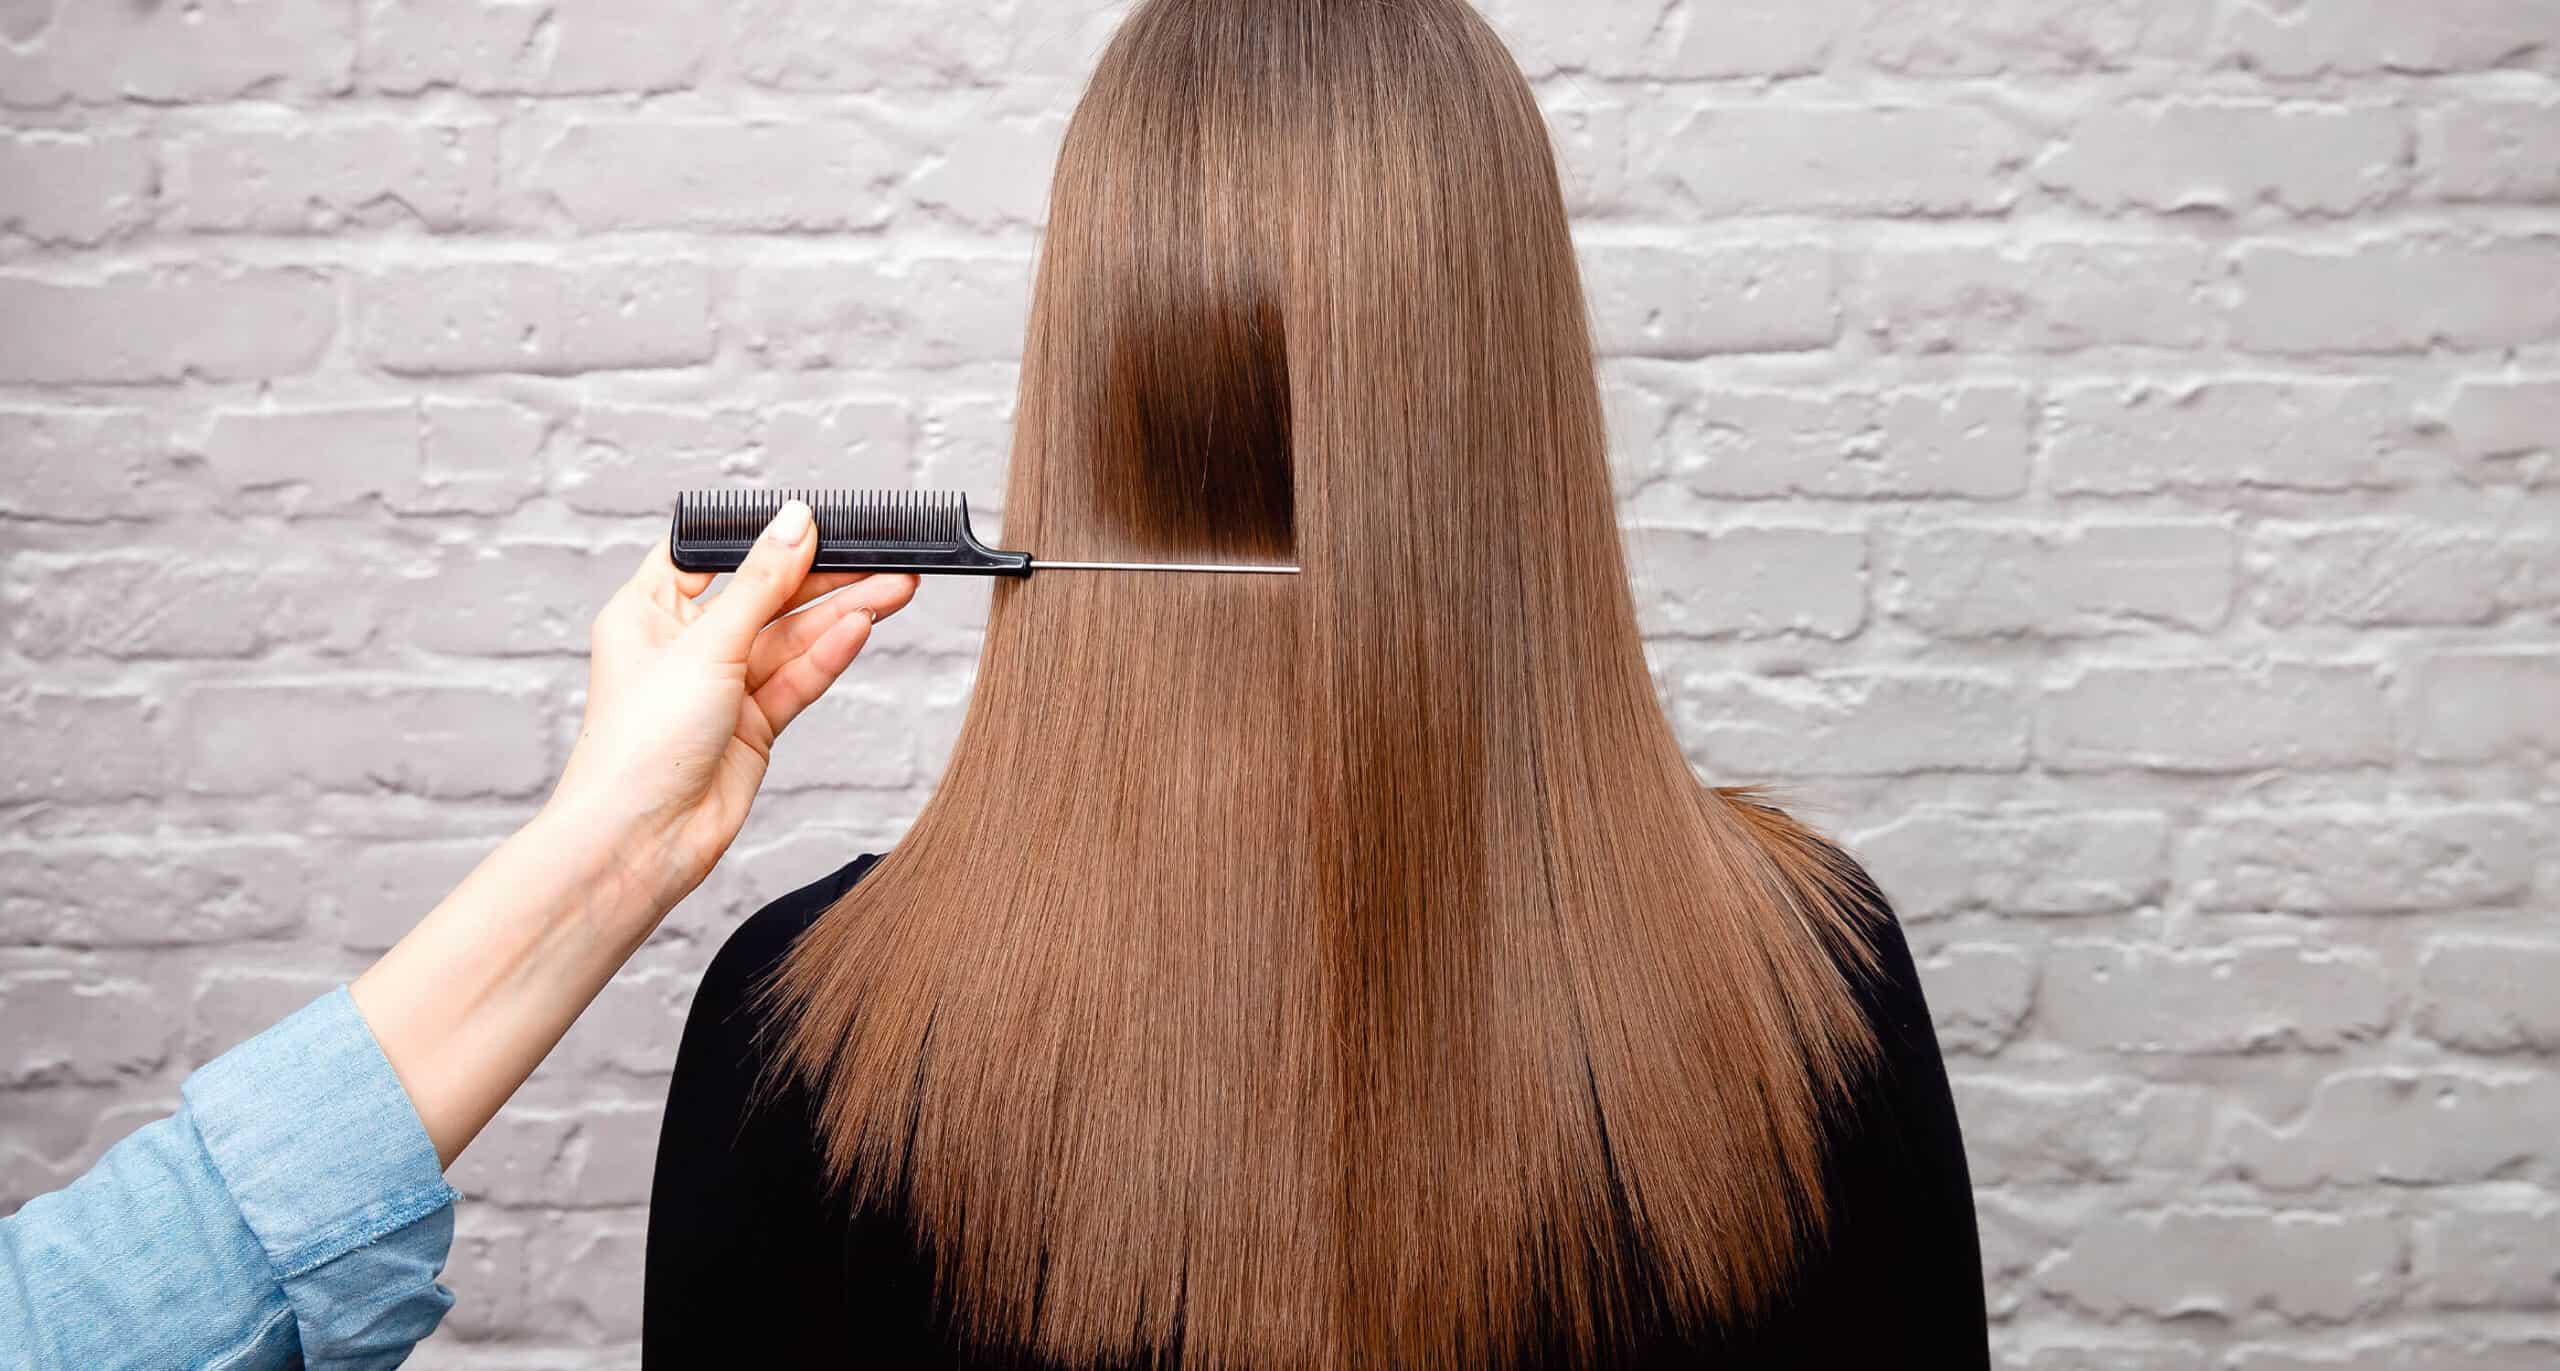 13 Side Effects Of Hair Smoothing